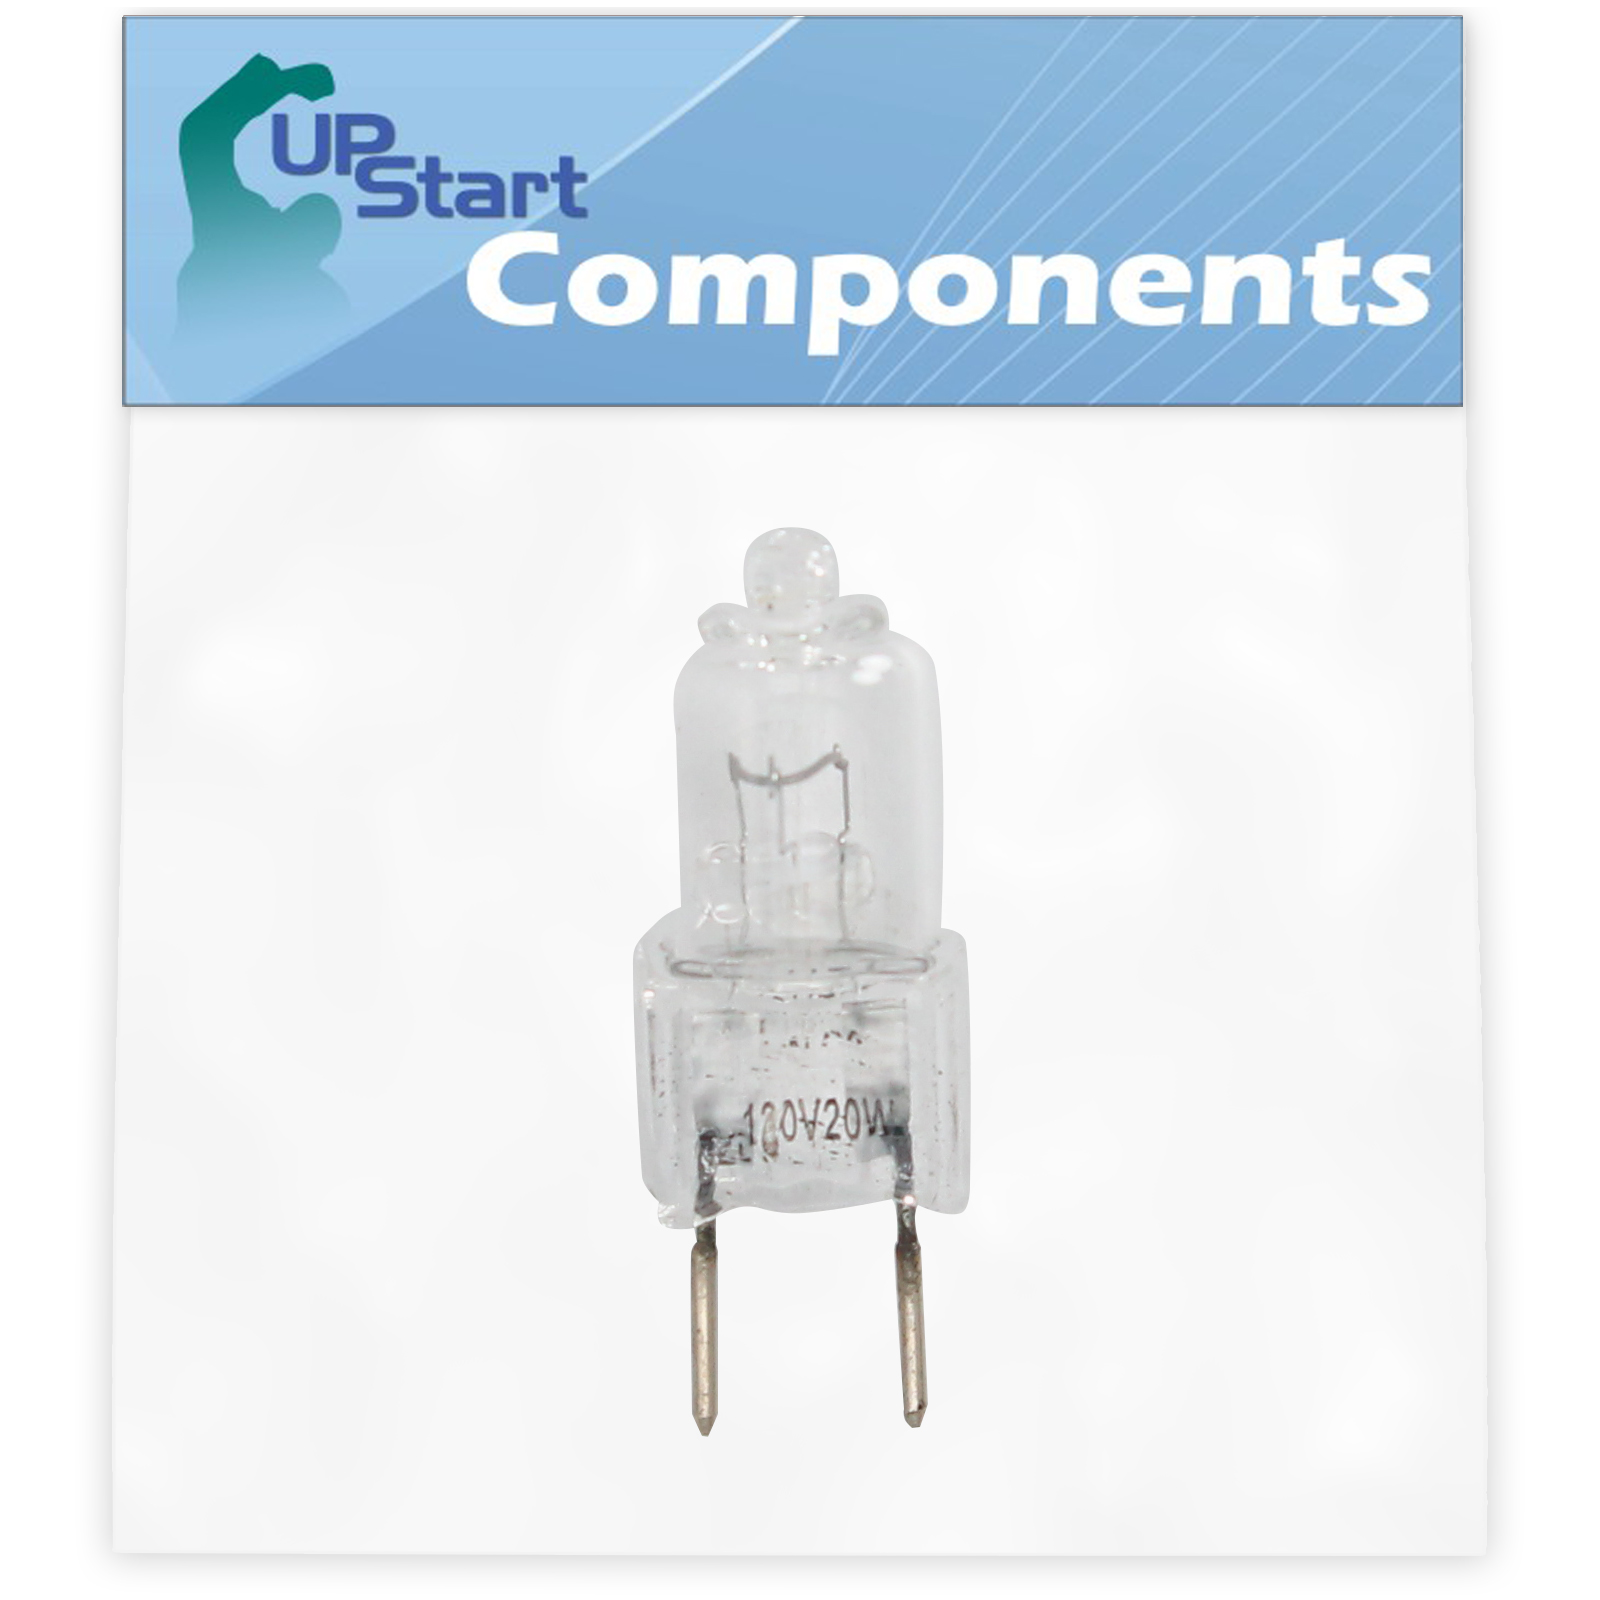 UpStart Components 4713-001165 Microwave Halogen Light Bulb Replacement for Kenmore / Sears 40180099700 Microwave